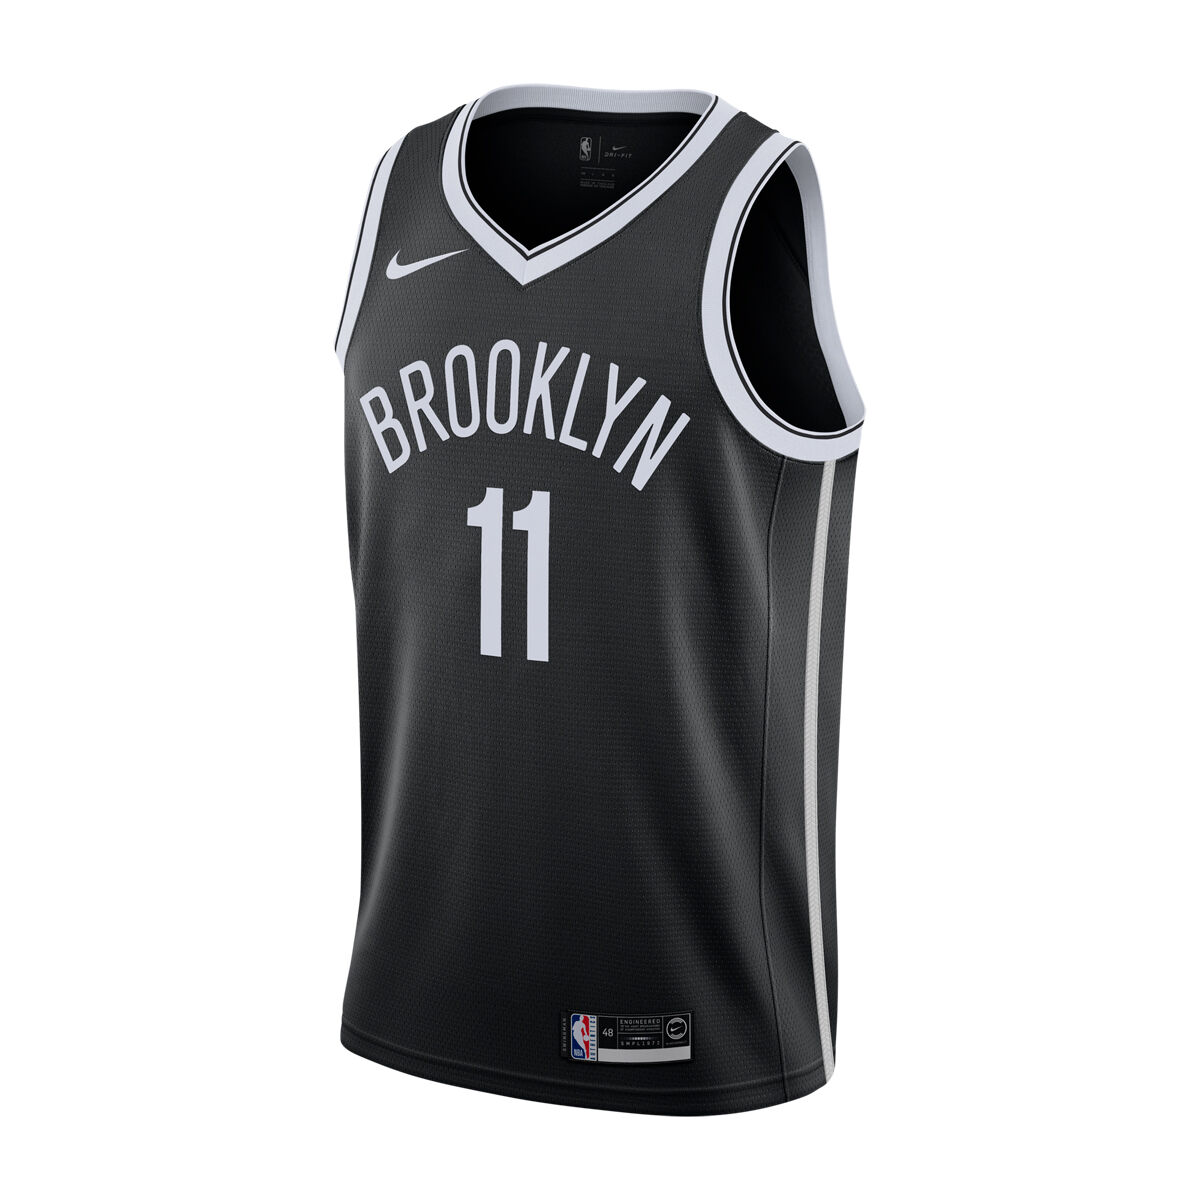 kyrie irving jersey buy